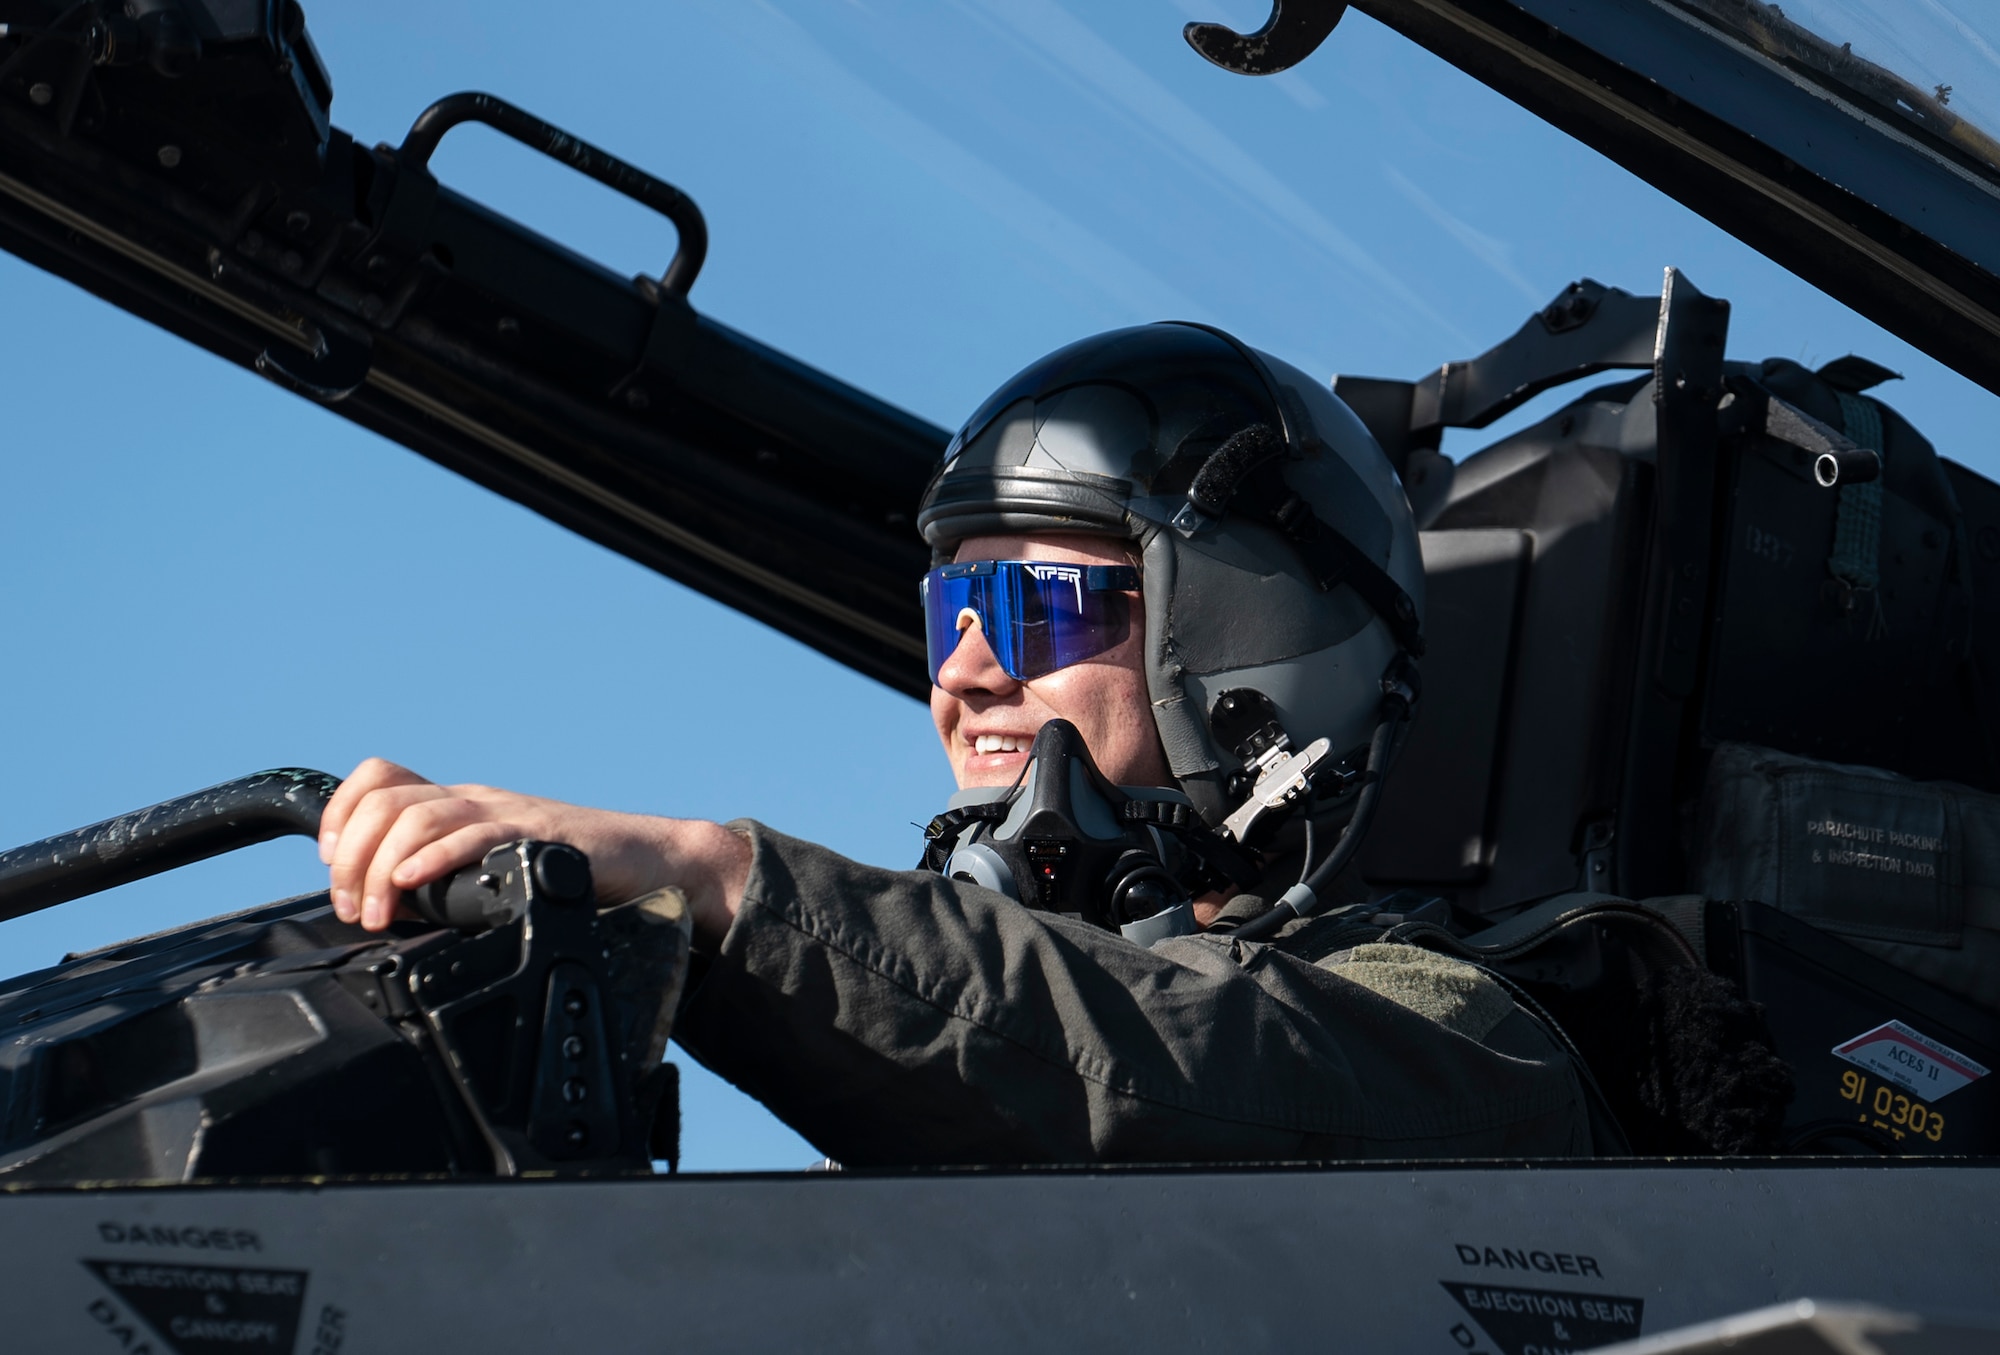 U.S. Air Force Senior Airman Joseph Robinson, 48th Aircraft Maintenance Squadron dedicated crew chief, sits in the cockpit of an F-15E Strike Eagle for an orientation flight at Royal Air Force Lakenheath, England, Feb. 26, 2021. Orientation flights provide an opportunity for AMXS Airmen to become more familiar with the aircraft in their care and its capabilities, as well as the 48th Fighter Wing mission. (U.S. Air Force photo by Airman 1st Class Jessi Monte)